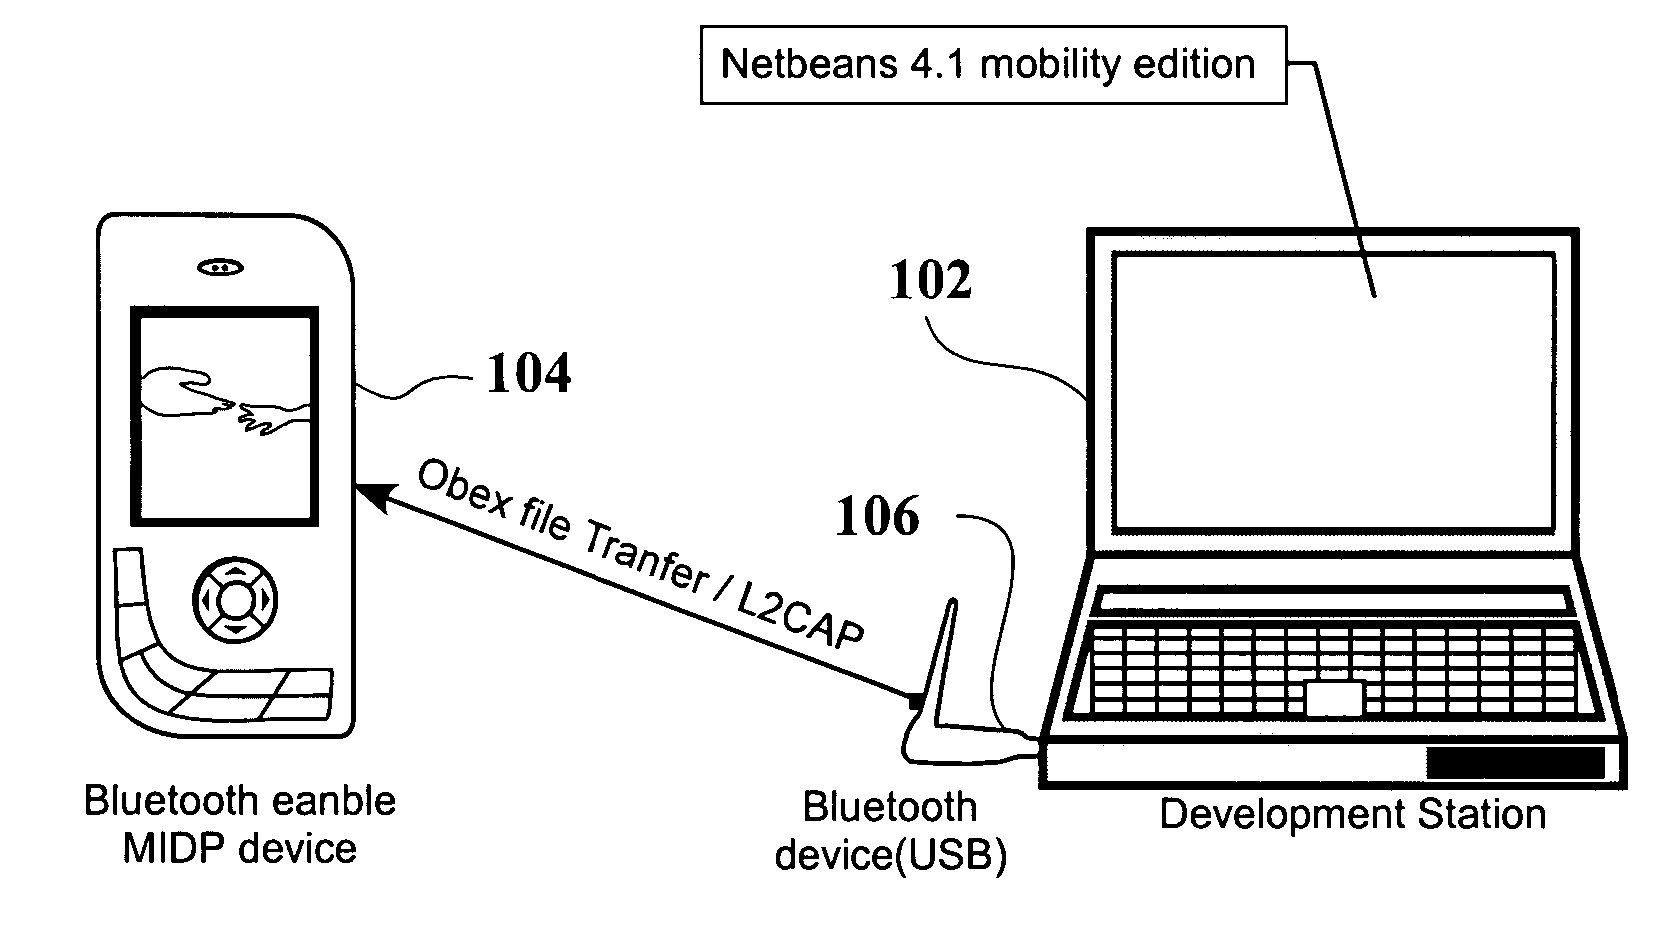 Computer implemented methods for transferring files from a development environment to target mobile devices